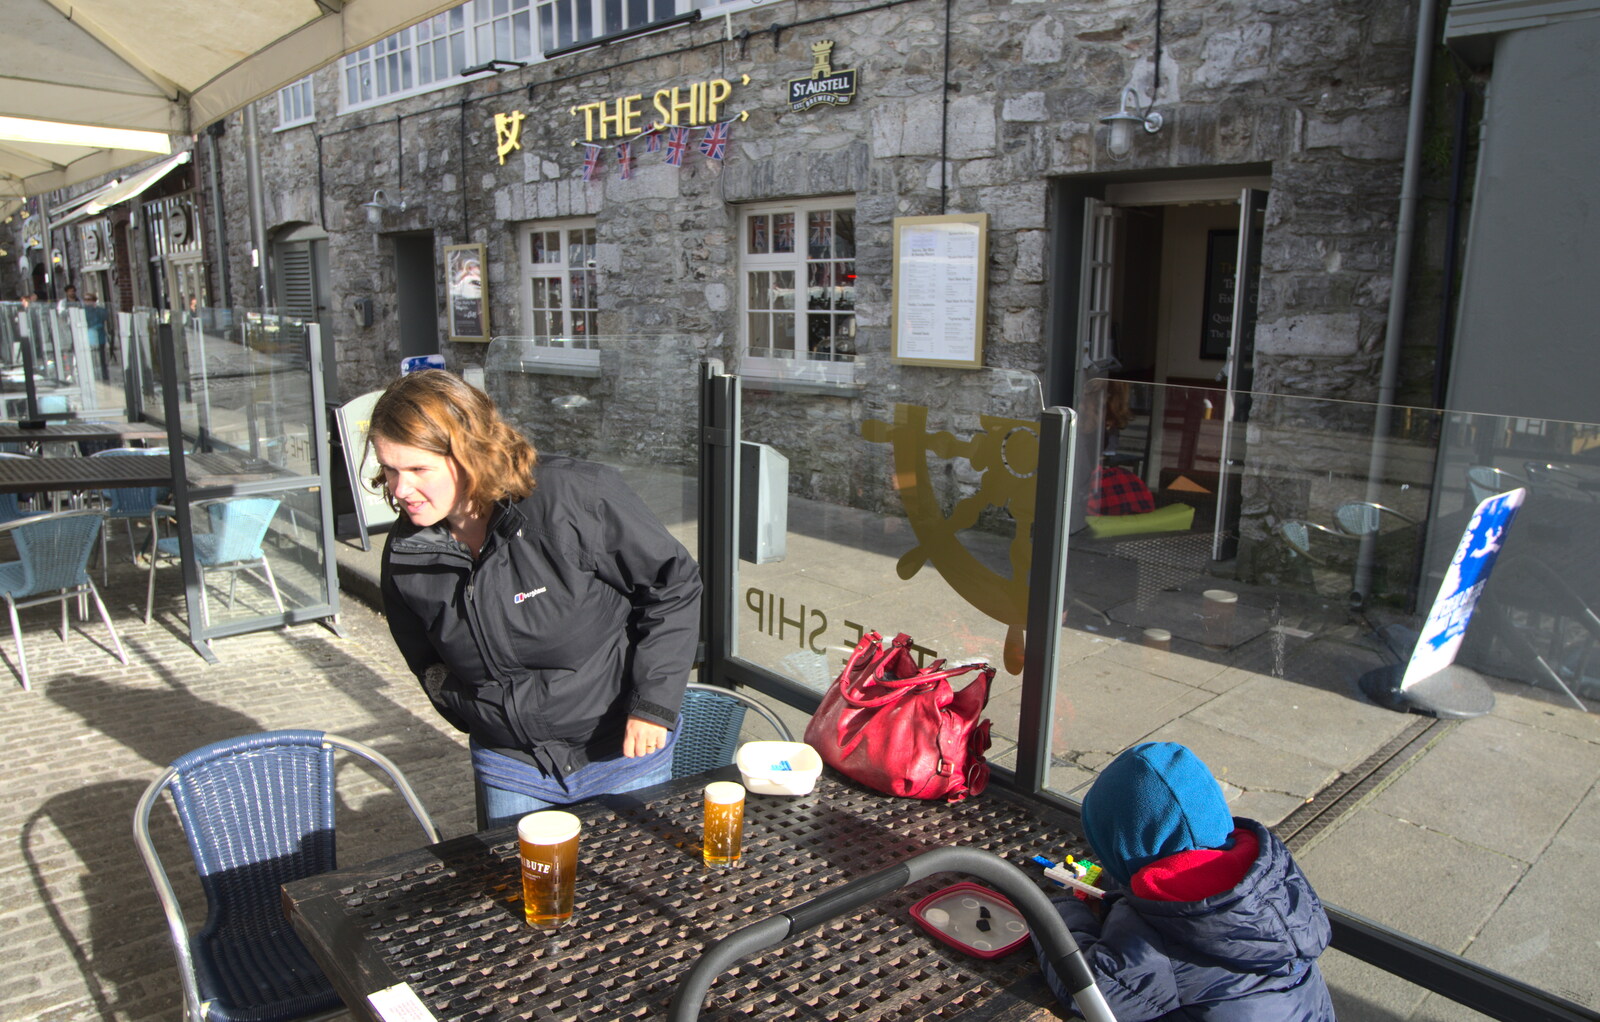 Time for a beer outside The Ship Inn from A Visit to the Aquarium, The Barbican and Dartmoor, Plymouth, Devon - 10th June 2012